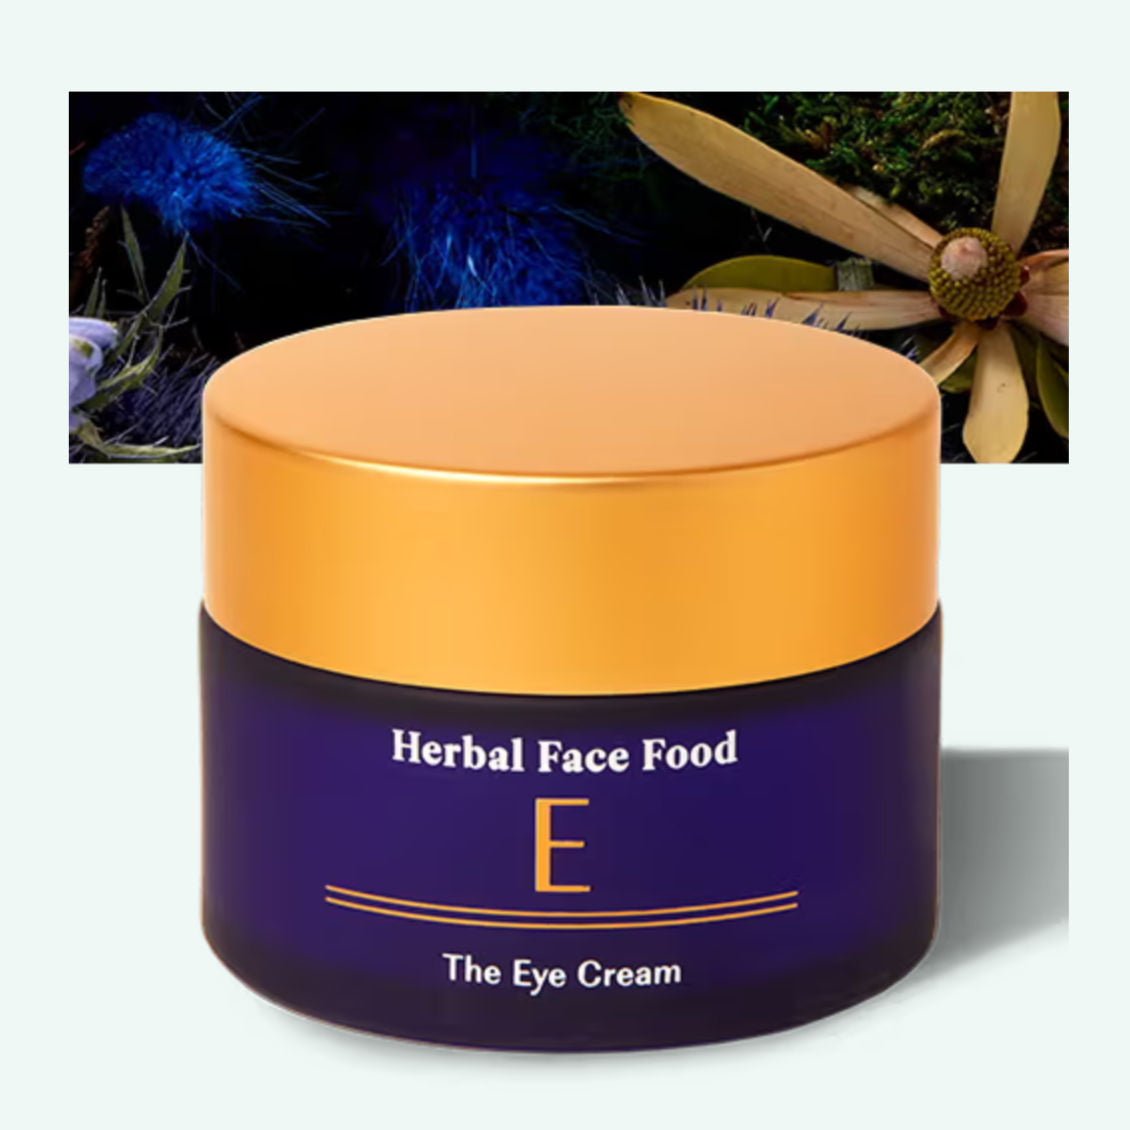 THE EYE CREAM - Save 20% with GLOW20 - Herbal Face Food - BLOOMINGFUL.COM - wedding, event, decor, gift, bouquet, arrangement, bridal, garland, fresh dried preserved artificial silk, birthday housewarming foliage